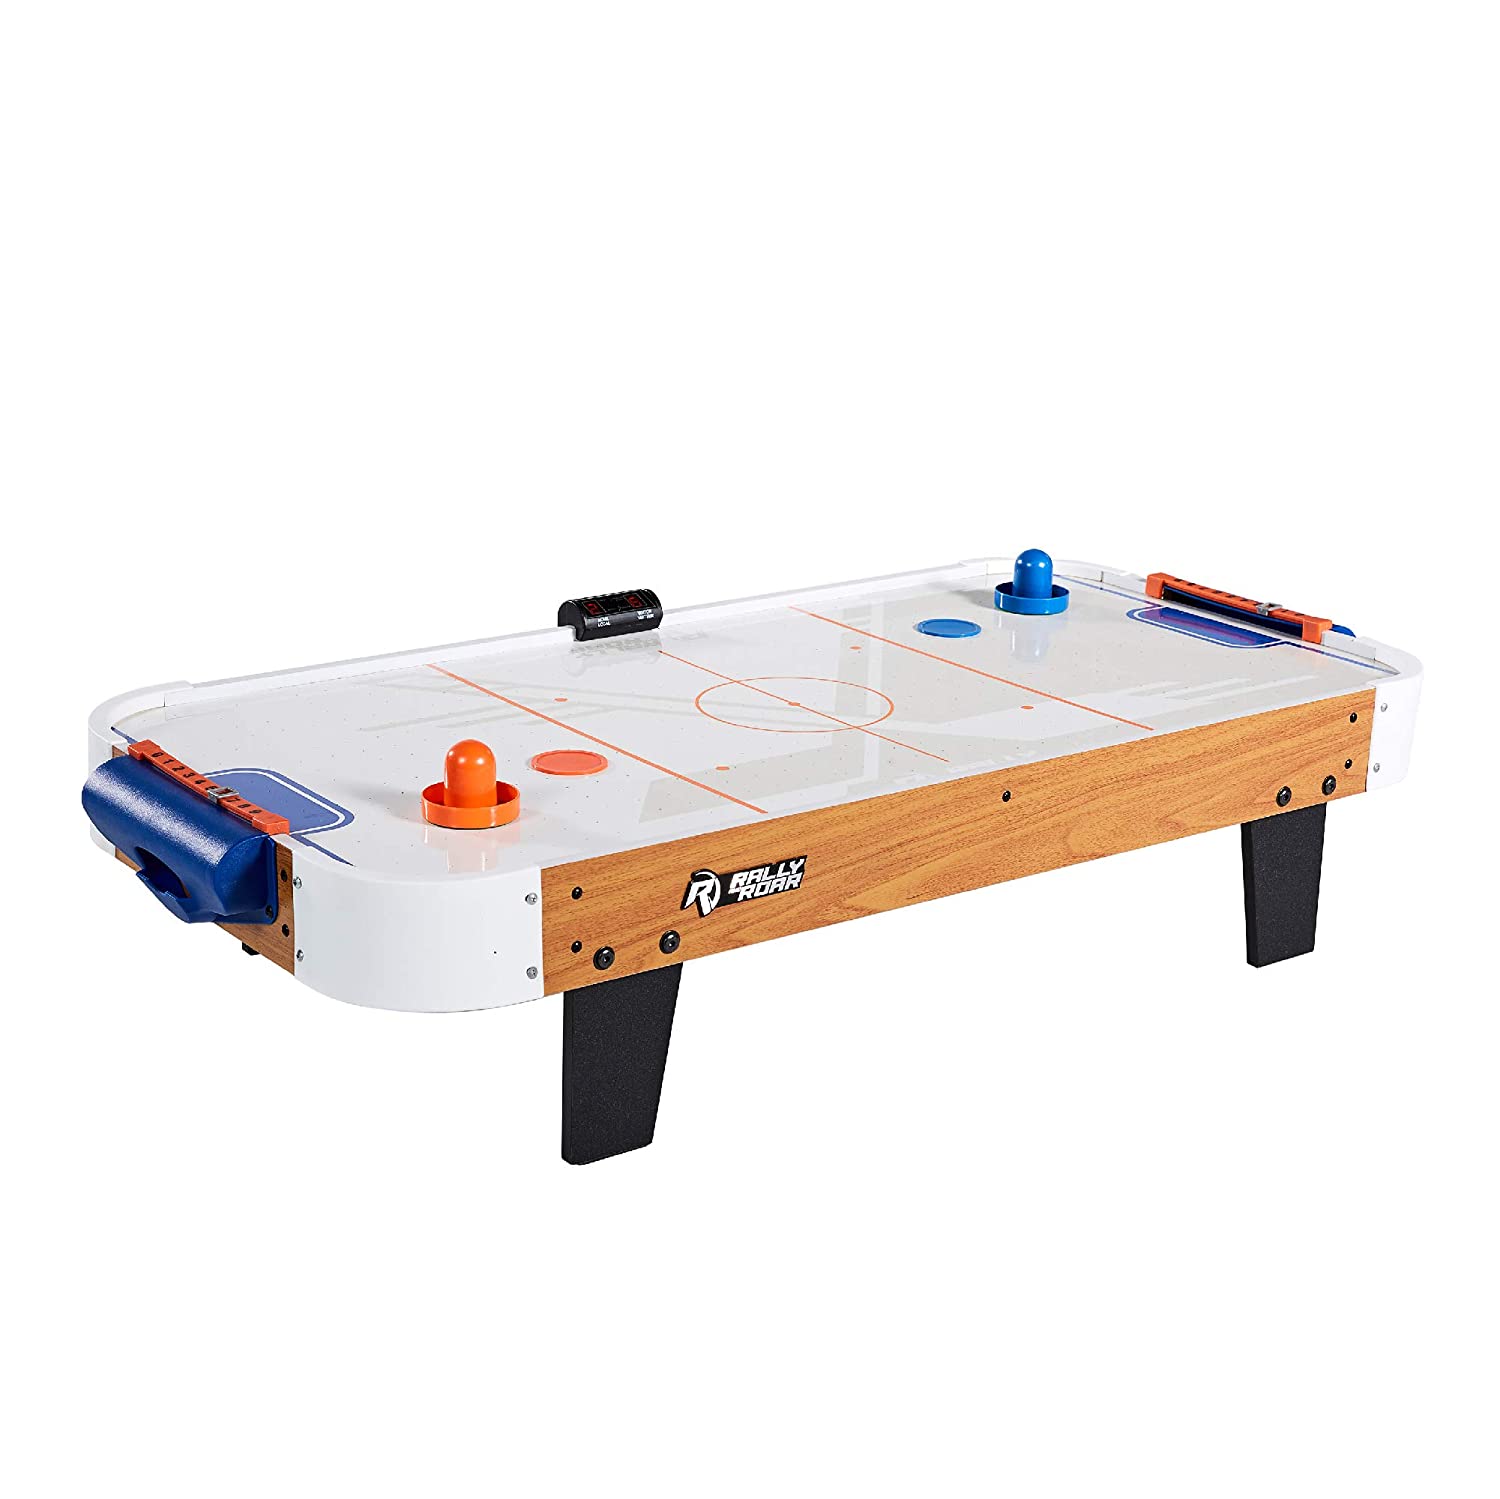 Tabletop Air Hockey Table, Travel-Size, Lightweight - Fun Arcade Games and Accessories for Kids